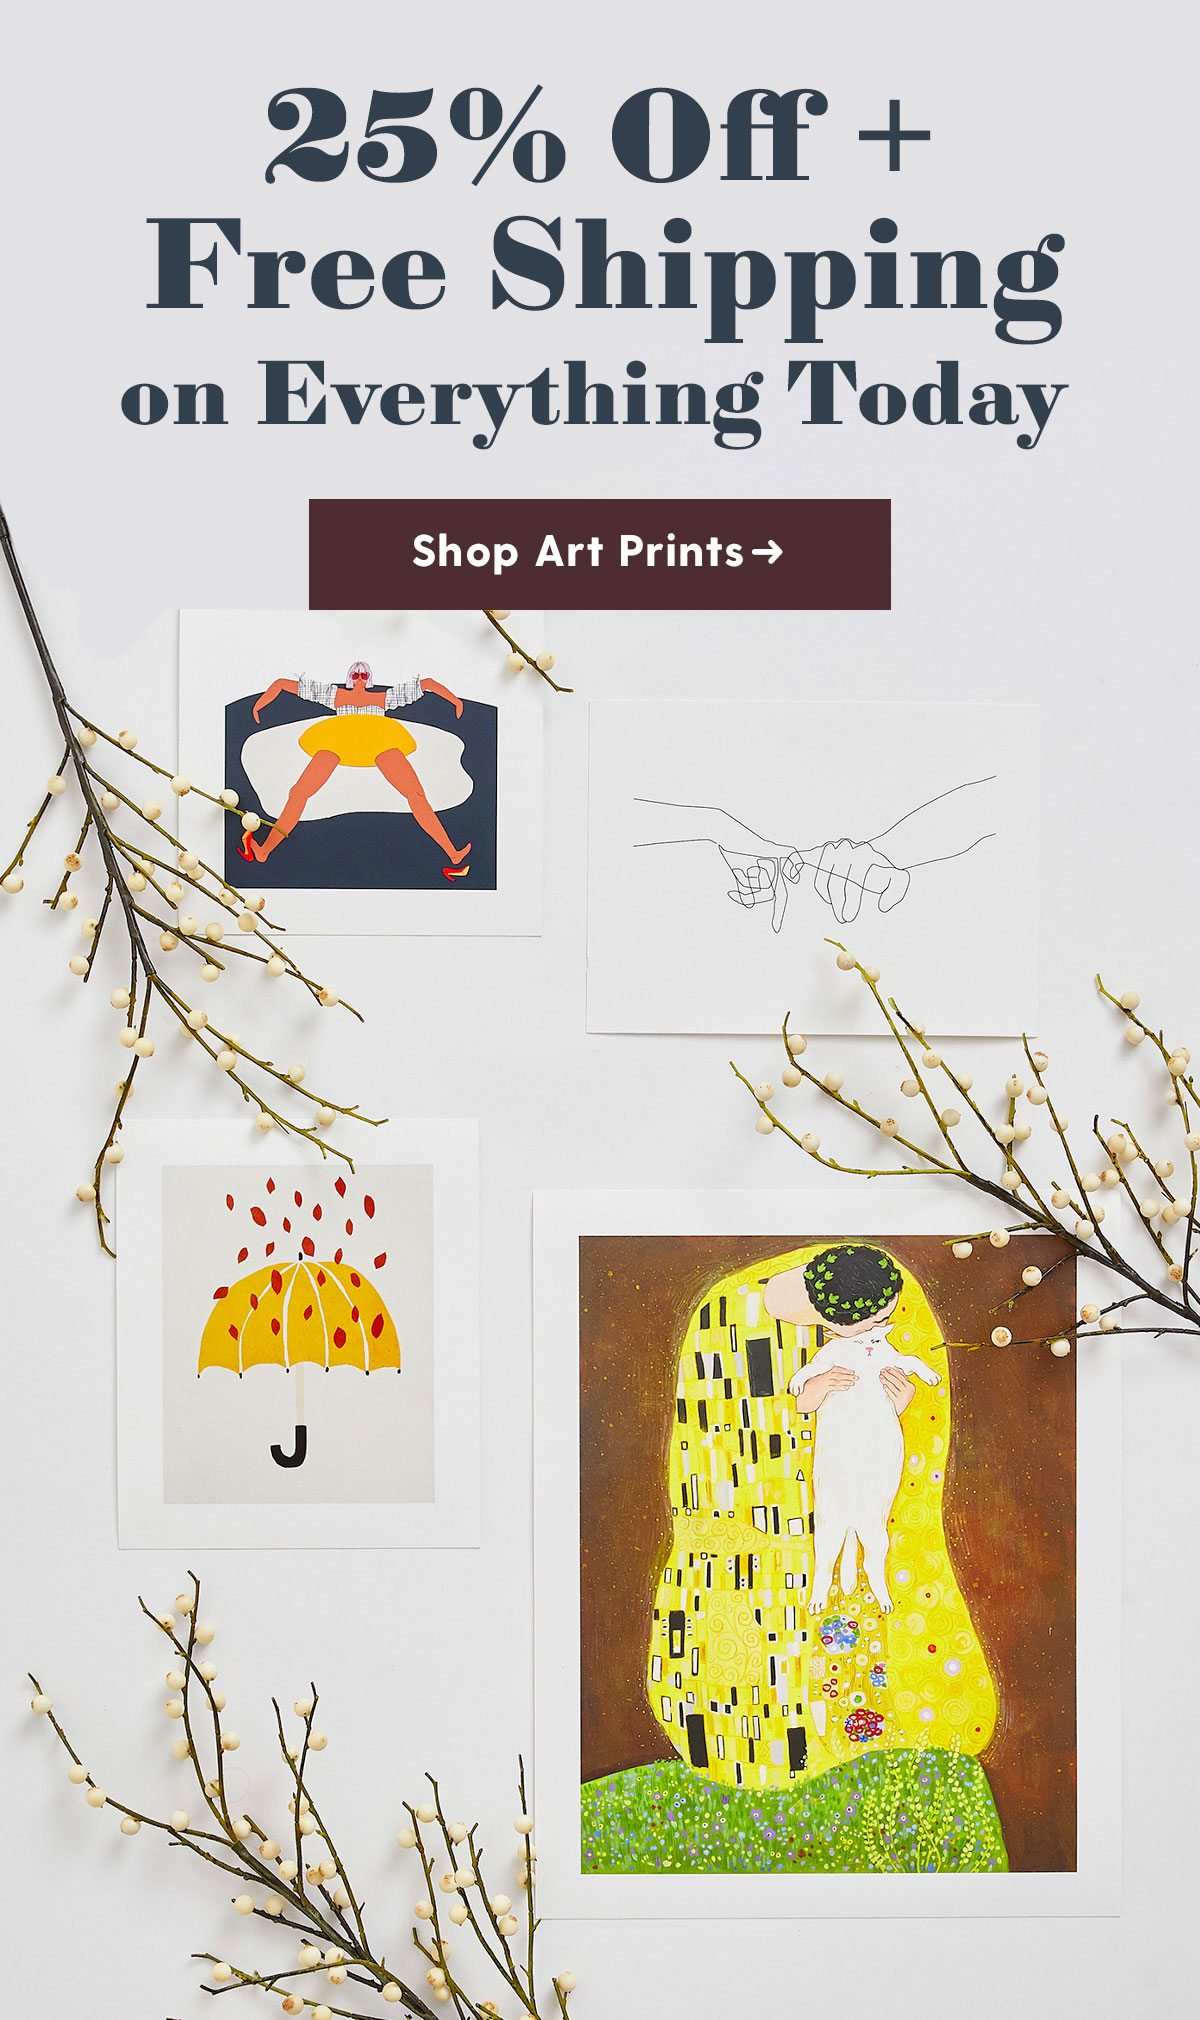 25% Off + Free Shipping on Everything Today. Shop Art Prints →